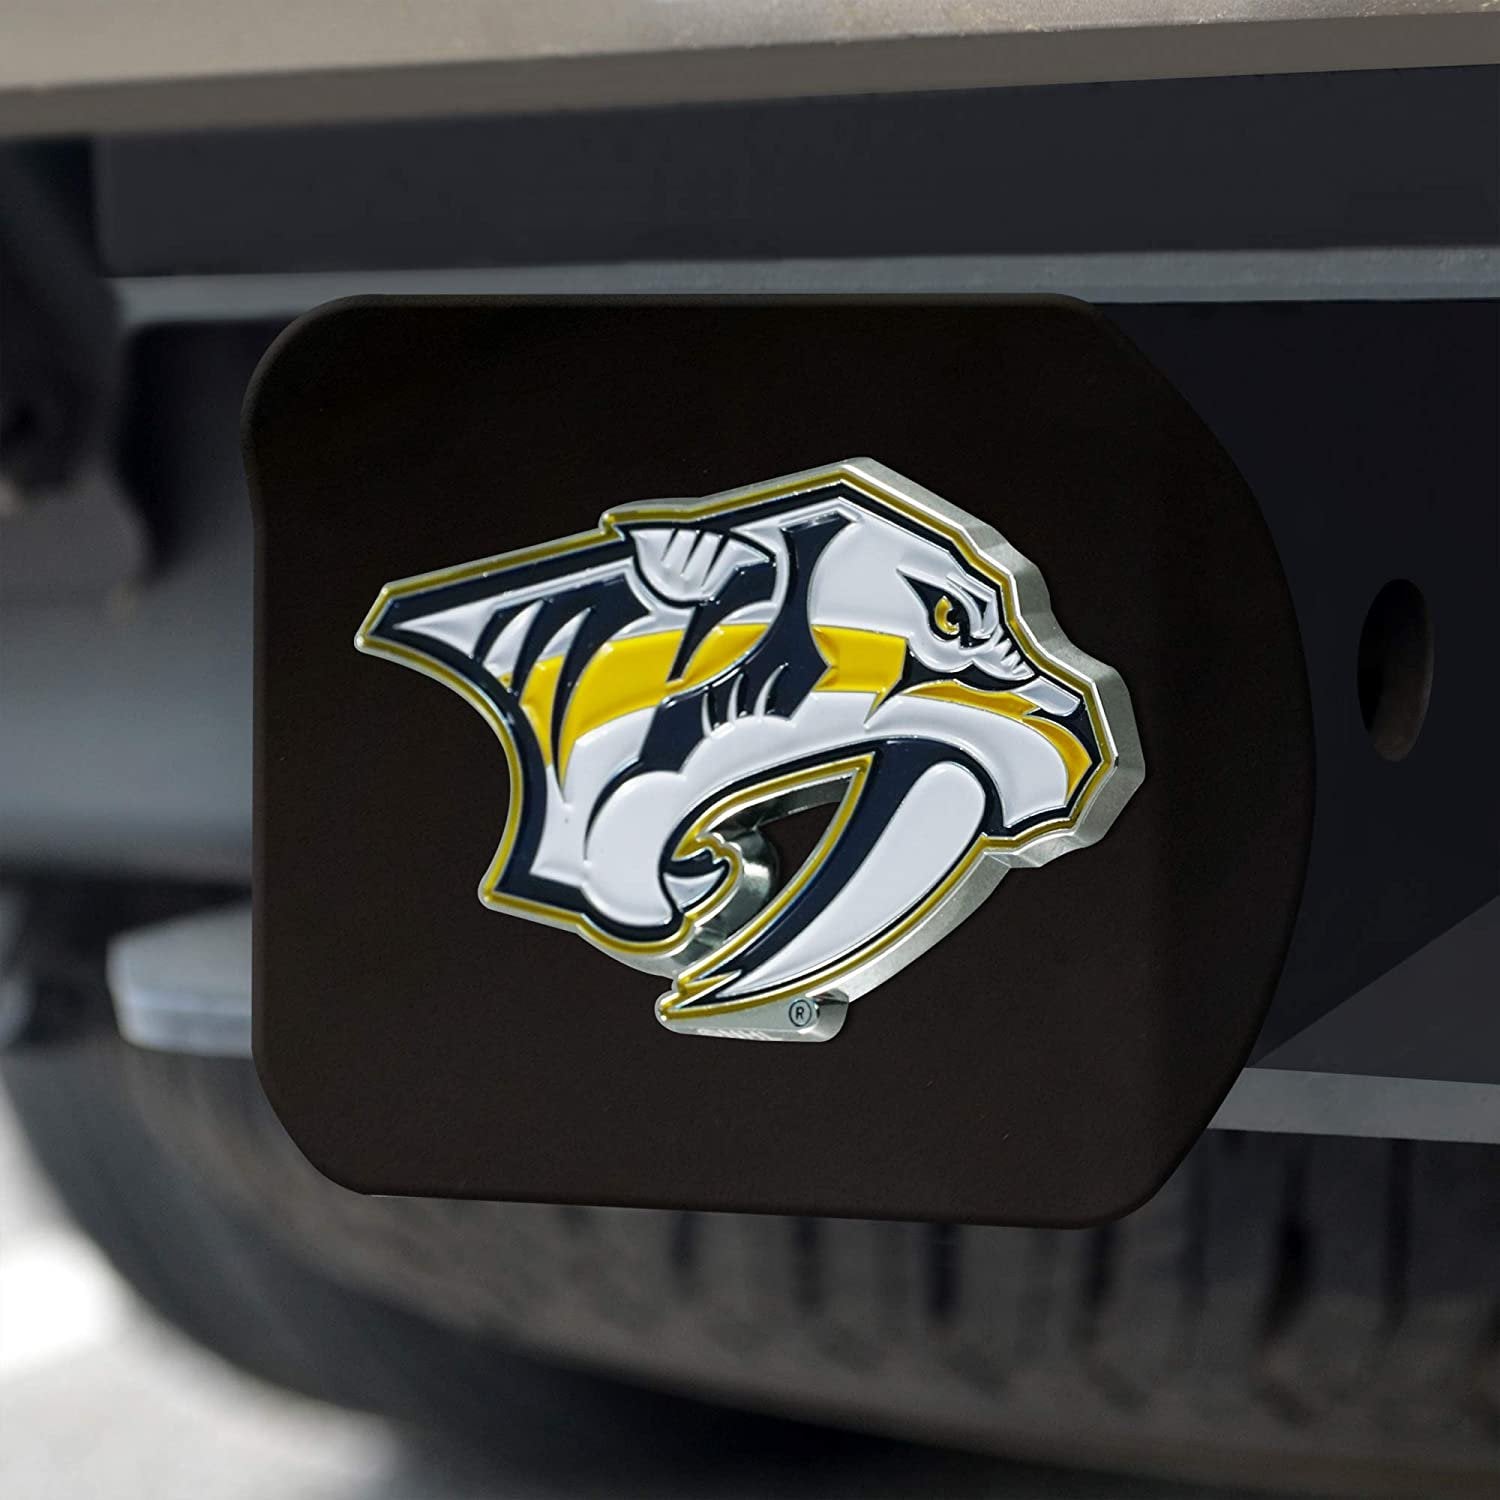 Nashville Predators Solid Metal Black Hitch Cover with Color Metal Emblem 2 Inch Square Type III